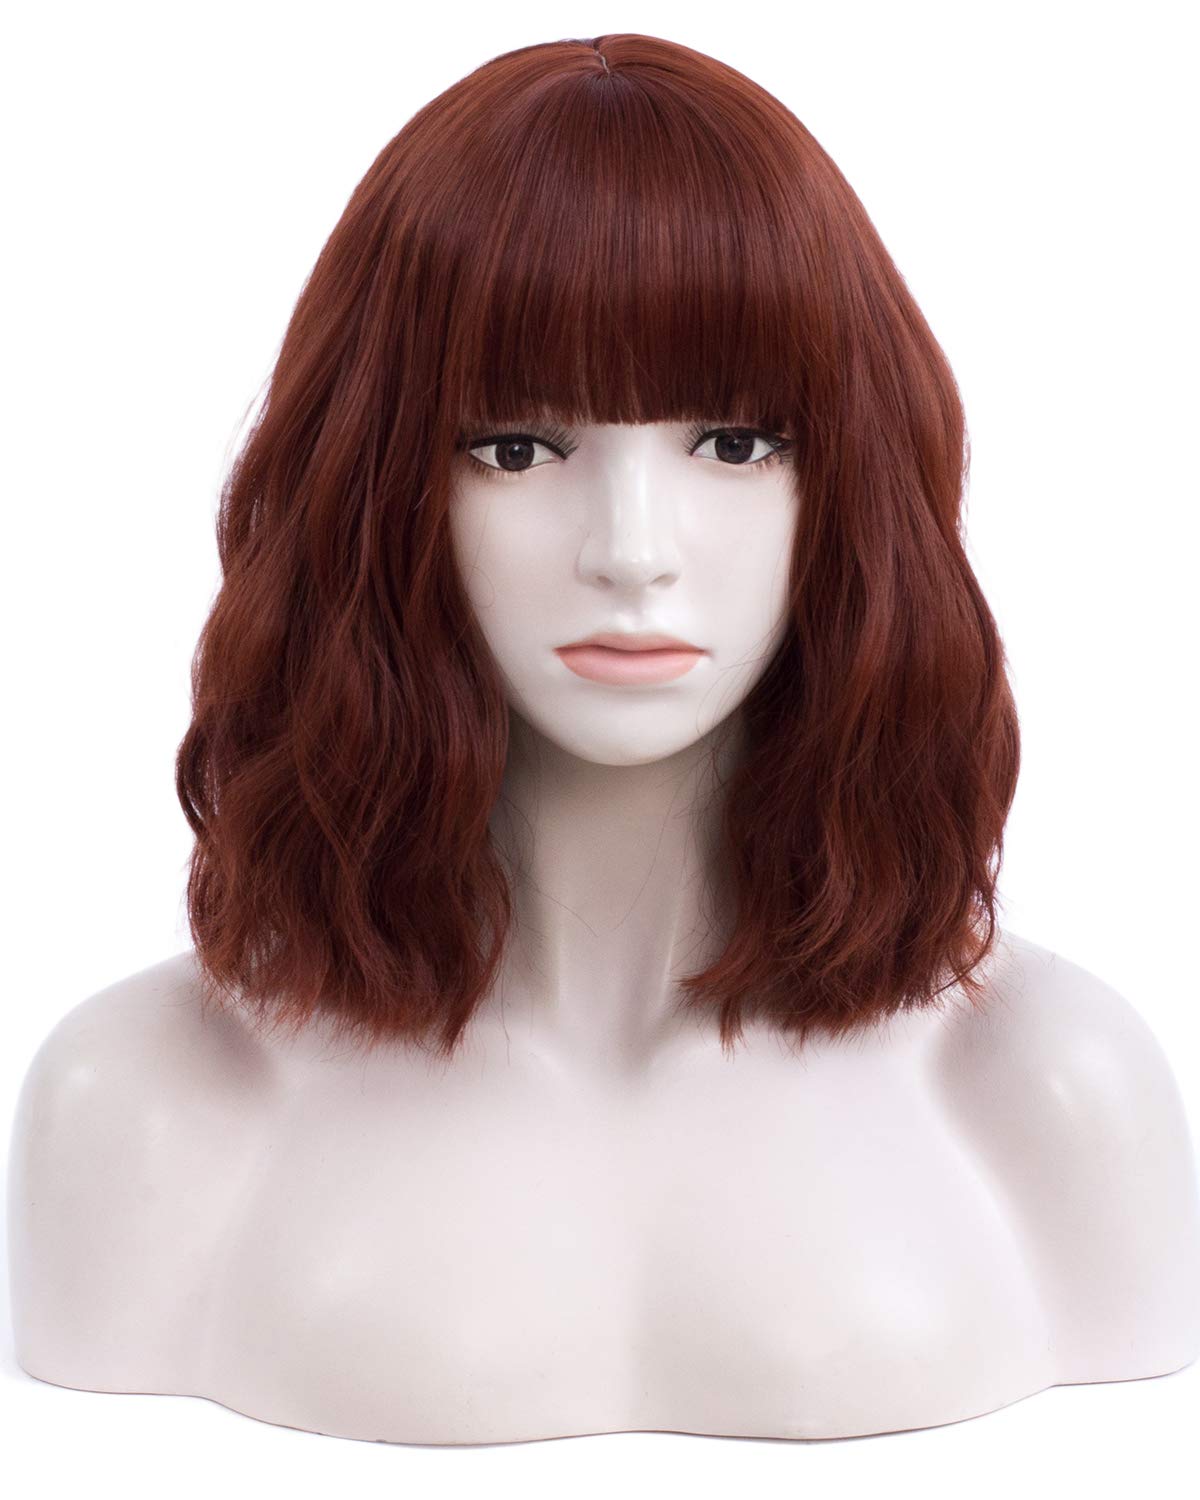 Price:$15.49    Netgo Wigs for Women, Natural Looking Heat Resistant Short Curly Wig for Girls Ladies Cosplay Party Daily Wear Premium Durable (Auburn)  Beauty